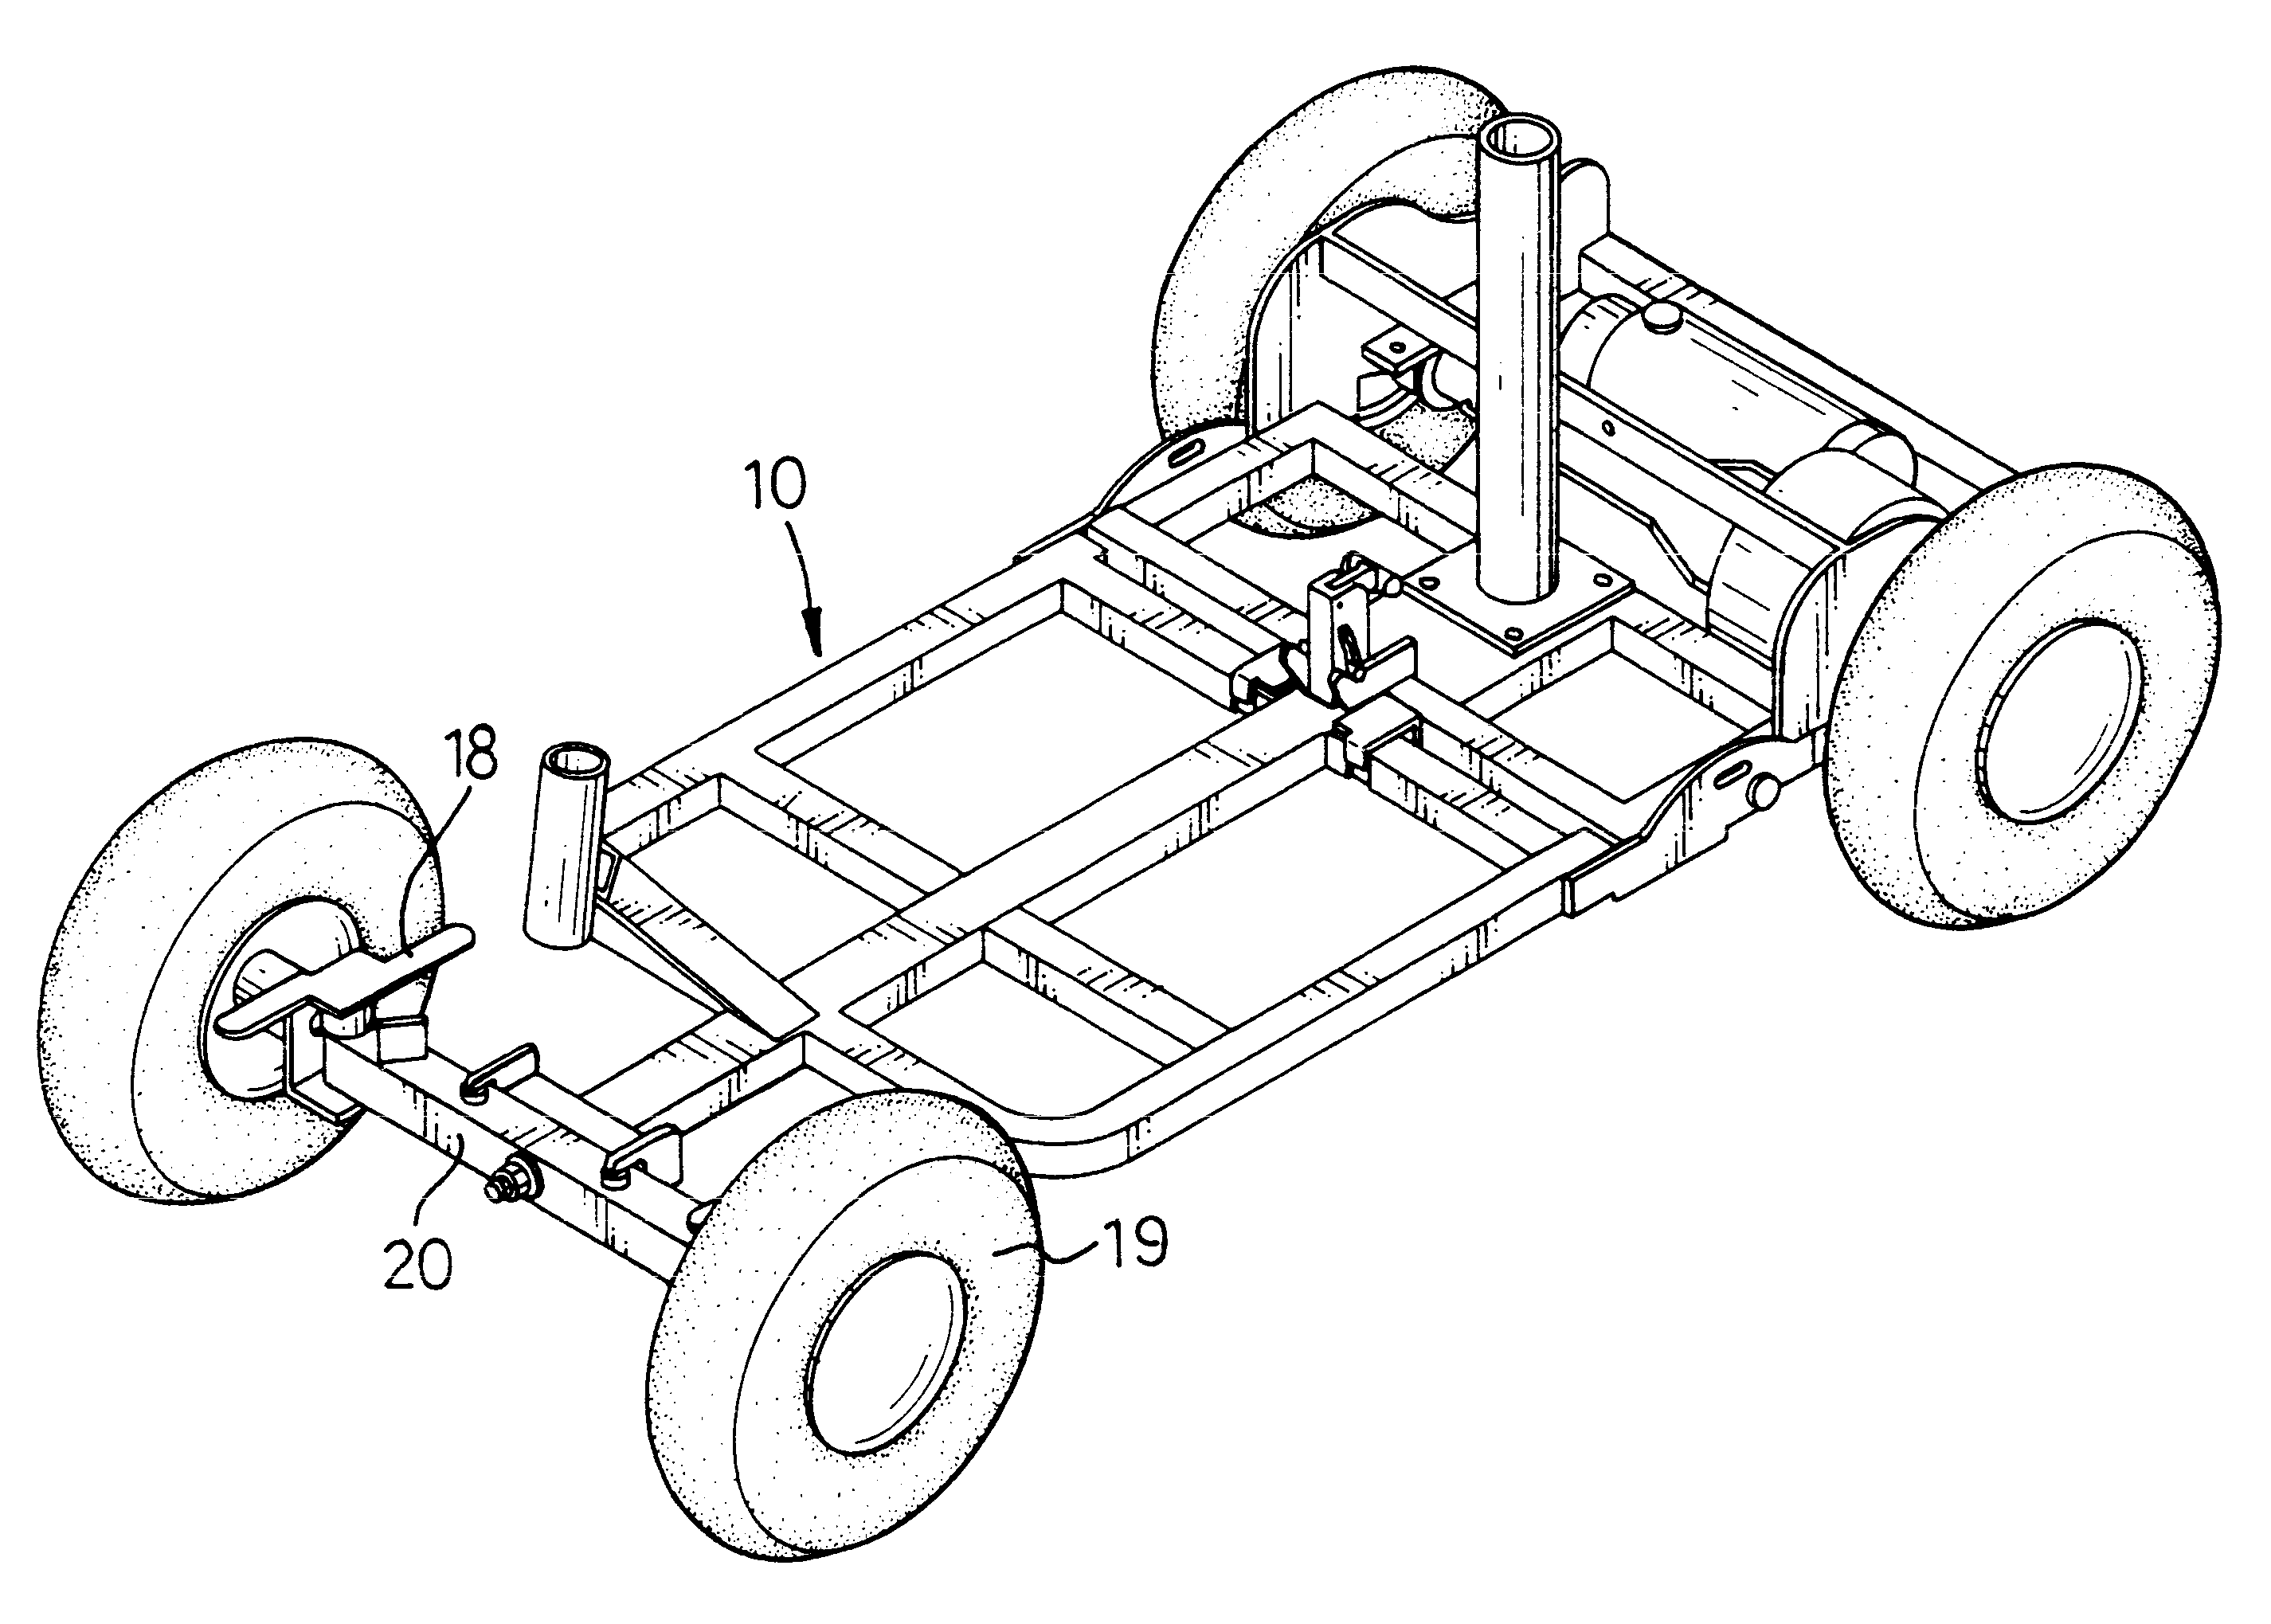 Frame for an electric scooter